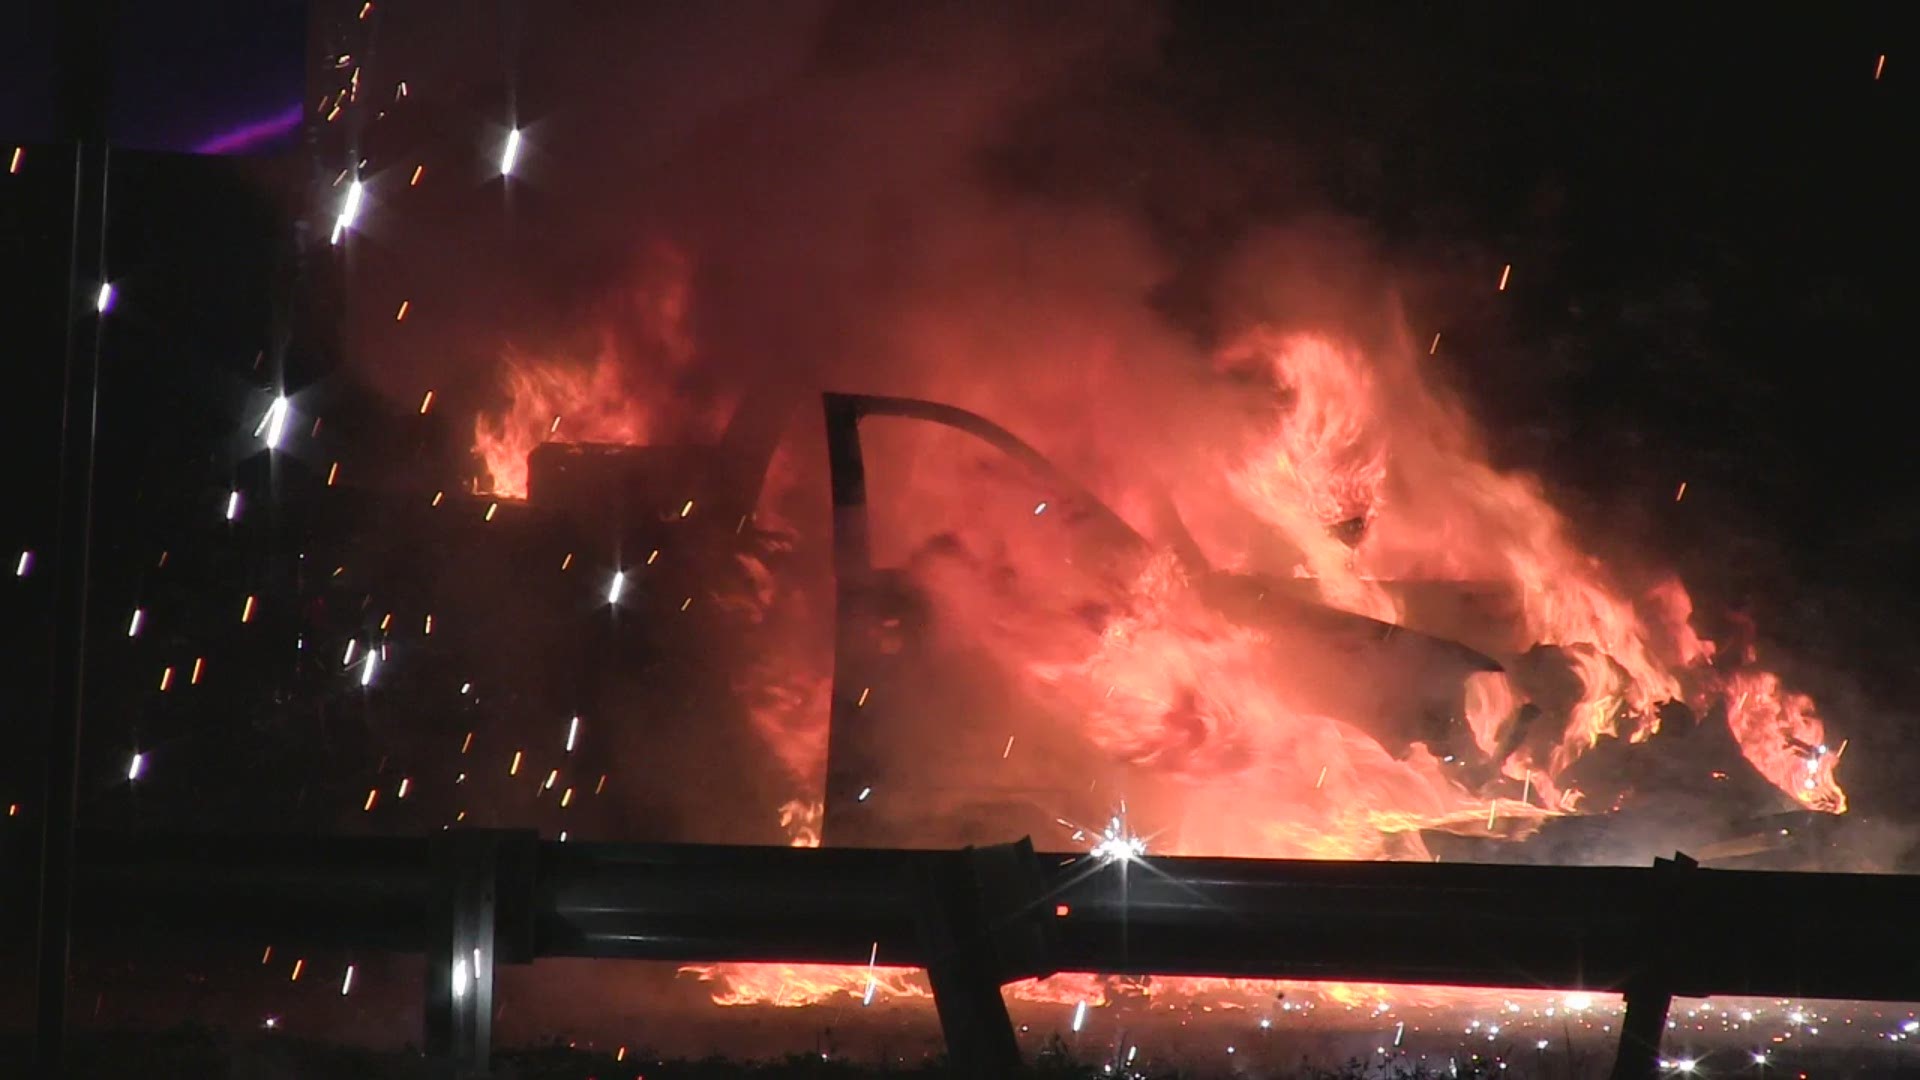 Magnesium and aluminum sparked the intense flames, Beaumont Fire-Rescue said.